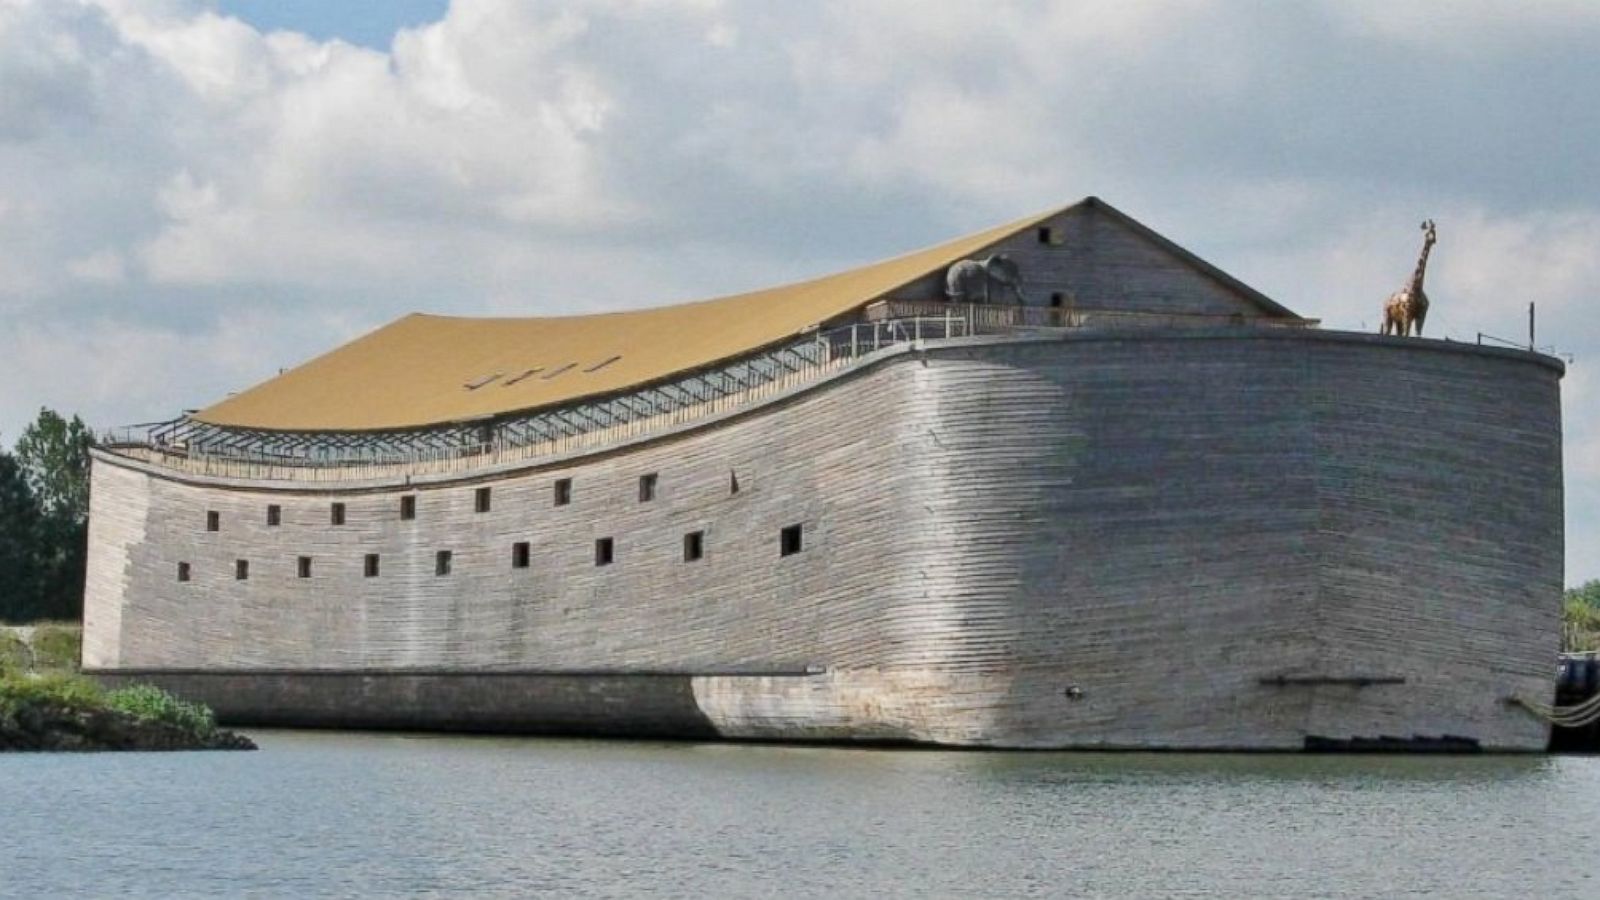 Builders of Noah's Ark 'Replica' Hope to Sail From Holland to Brazil - ABC News